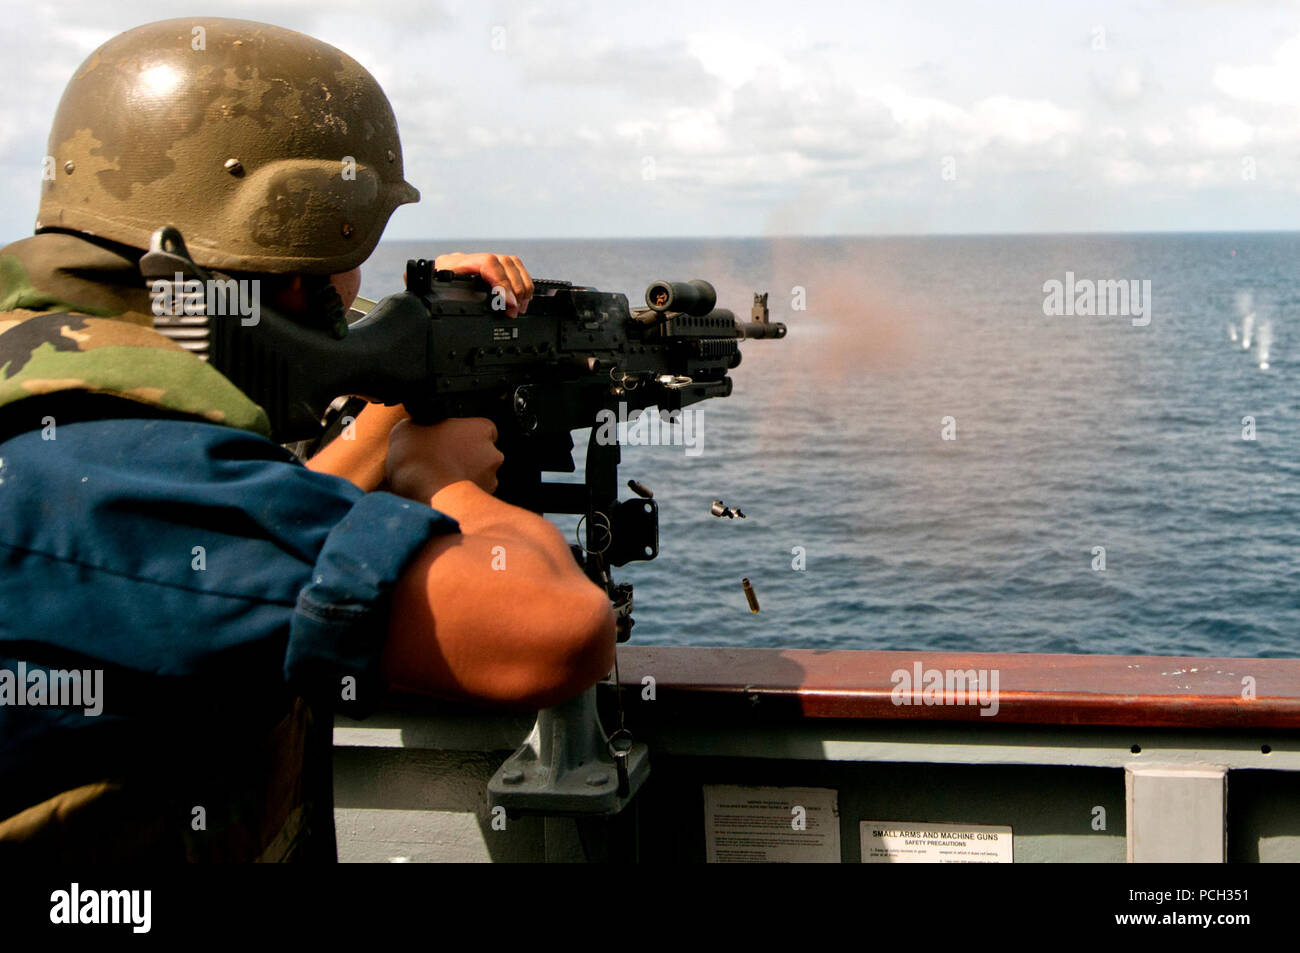 ATLANTIC OCEAN (March 23, 2013) Electronics Technician 3rd Class Jonathan E. Flores fires a M240B machine gun during a live-fire exercise aboard the guided-missile destroyer USS Winston S. Churchill (DDG 81). Winston S. Churchill is on deployment supporting maritime security operations, theater security cooperation efforts in the U.S. 2nd Fleet area of responsibility. Stock Photo